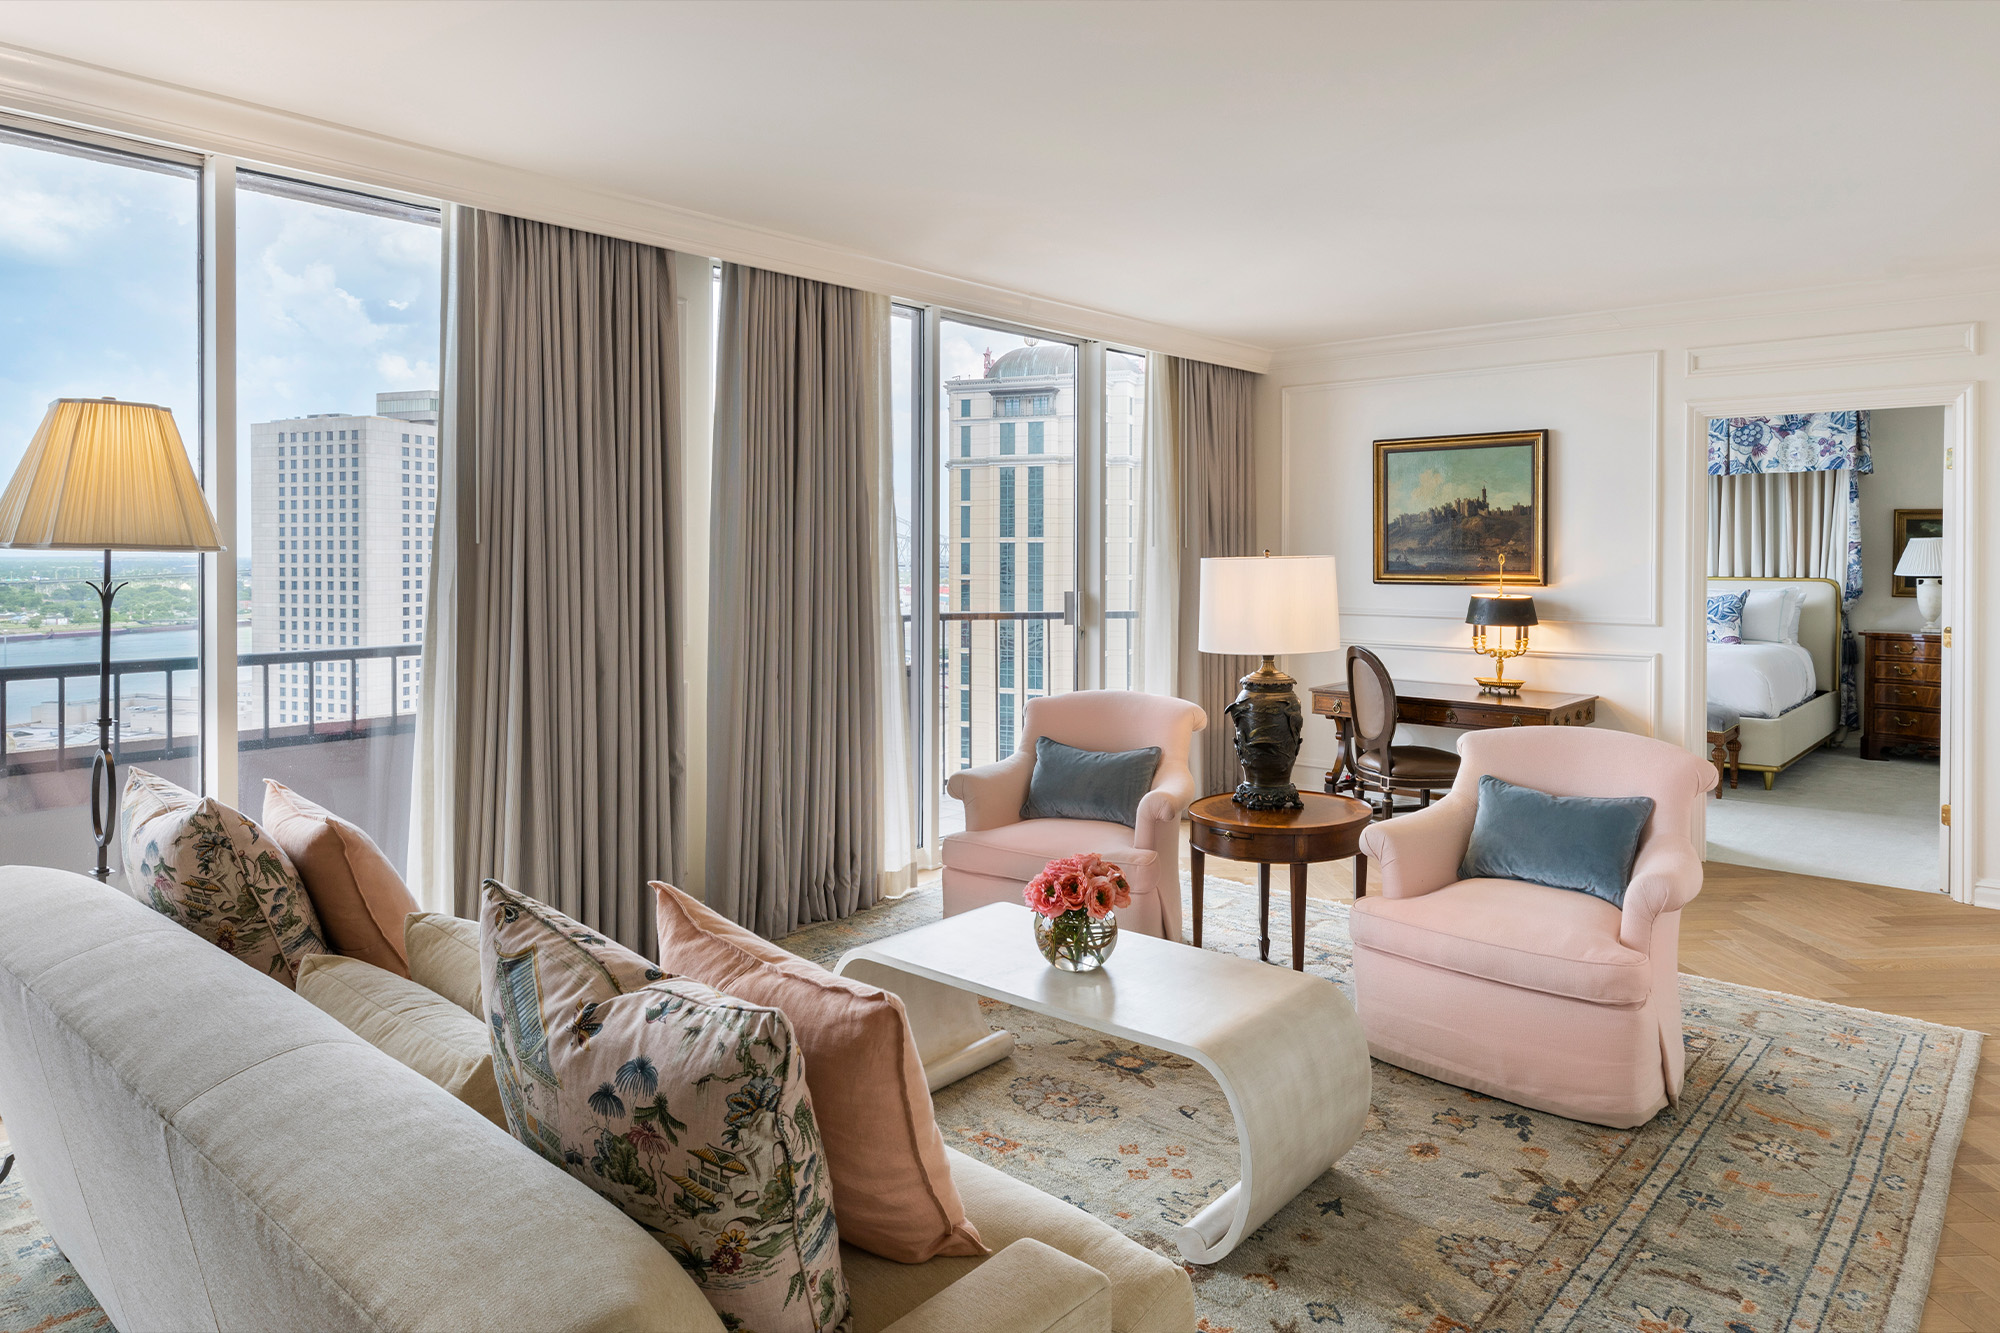 $2 Million Later, The Windsor Court Creates New Orleans’s Top Suite - The Windsor Court